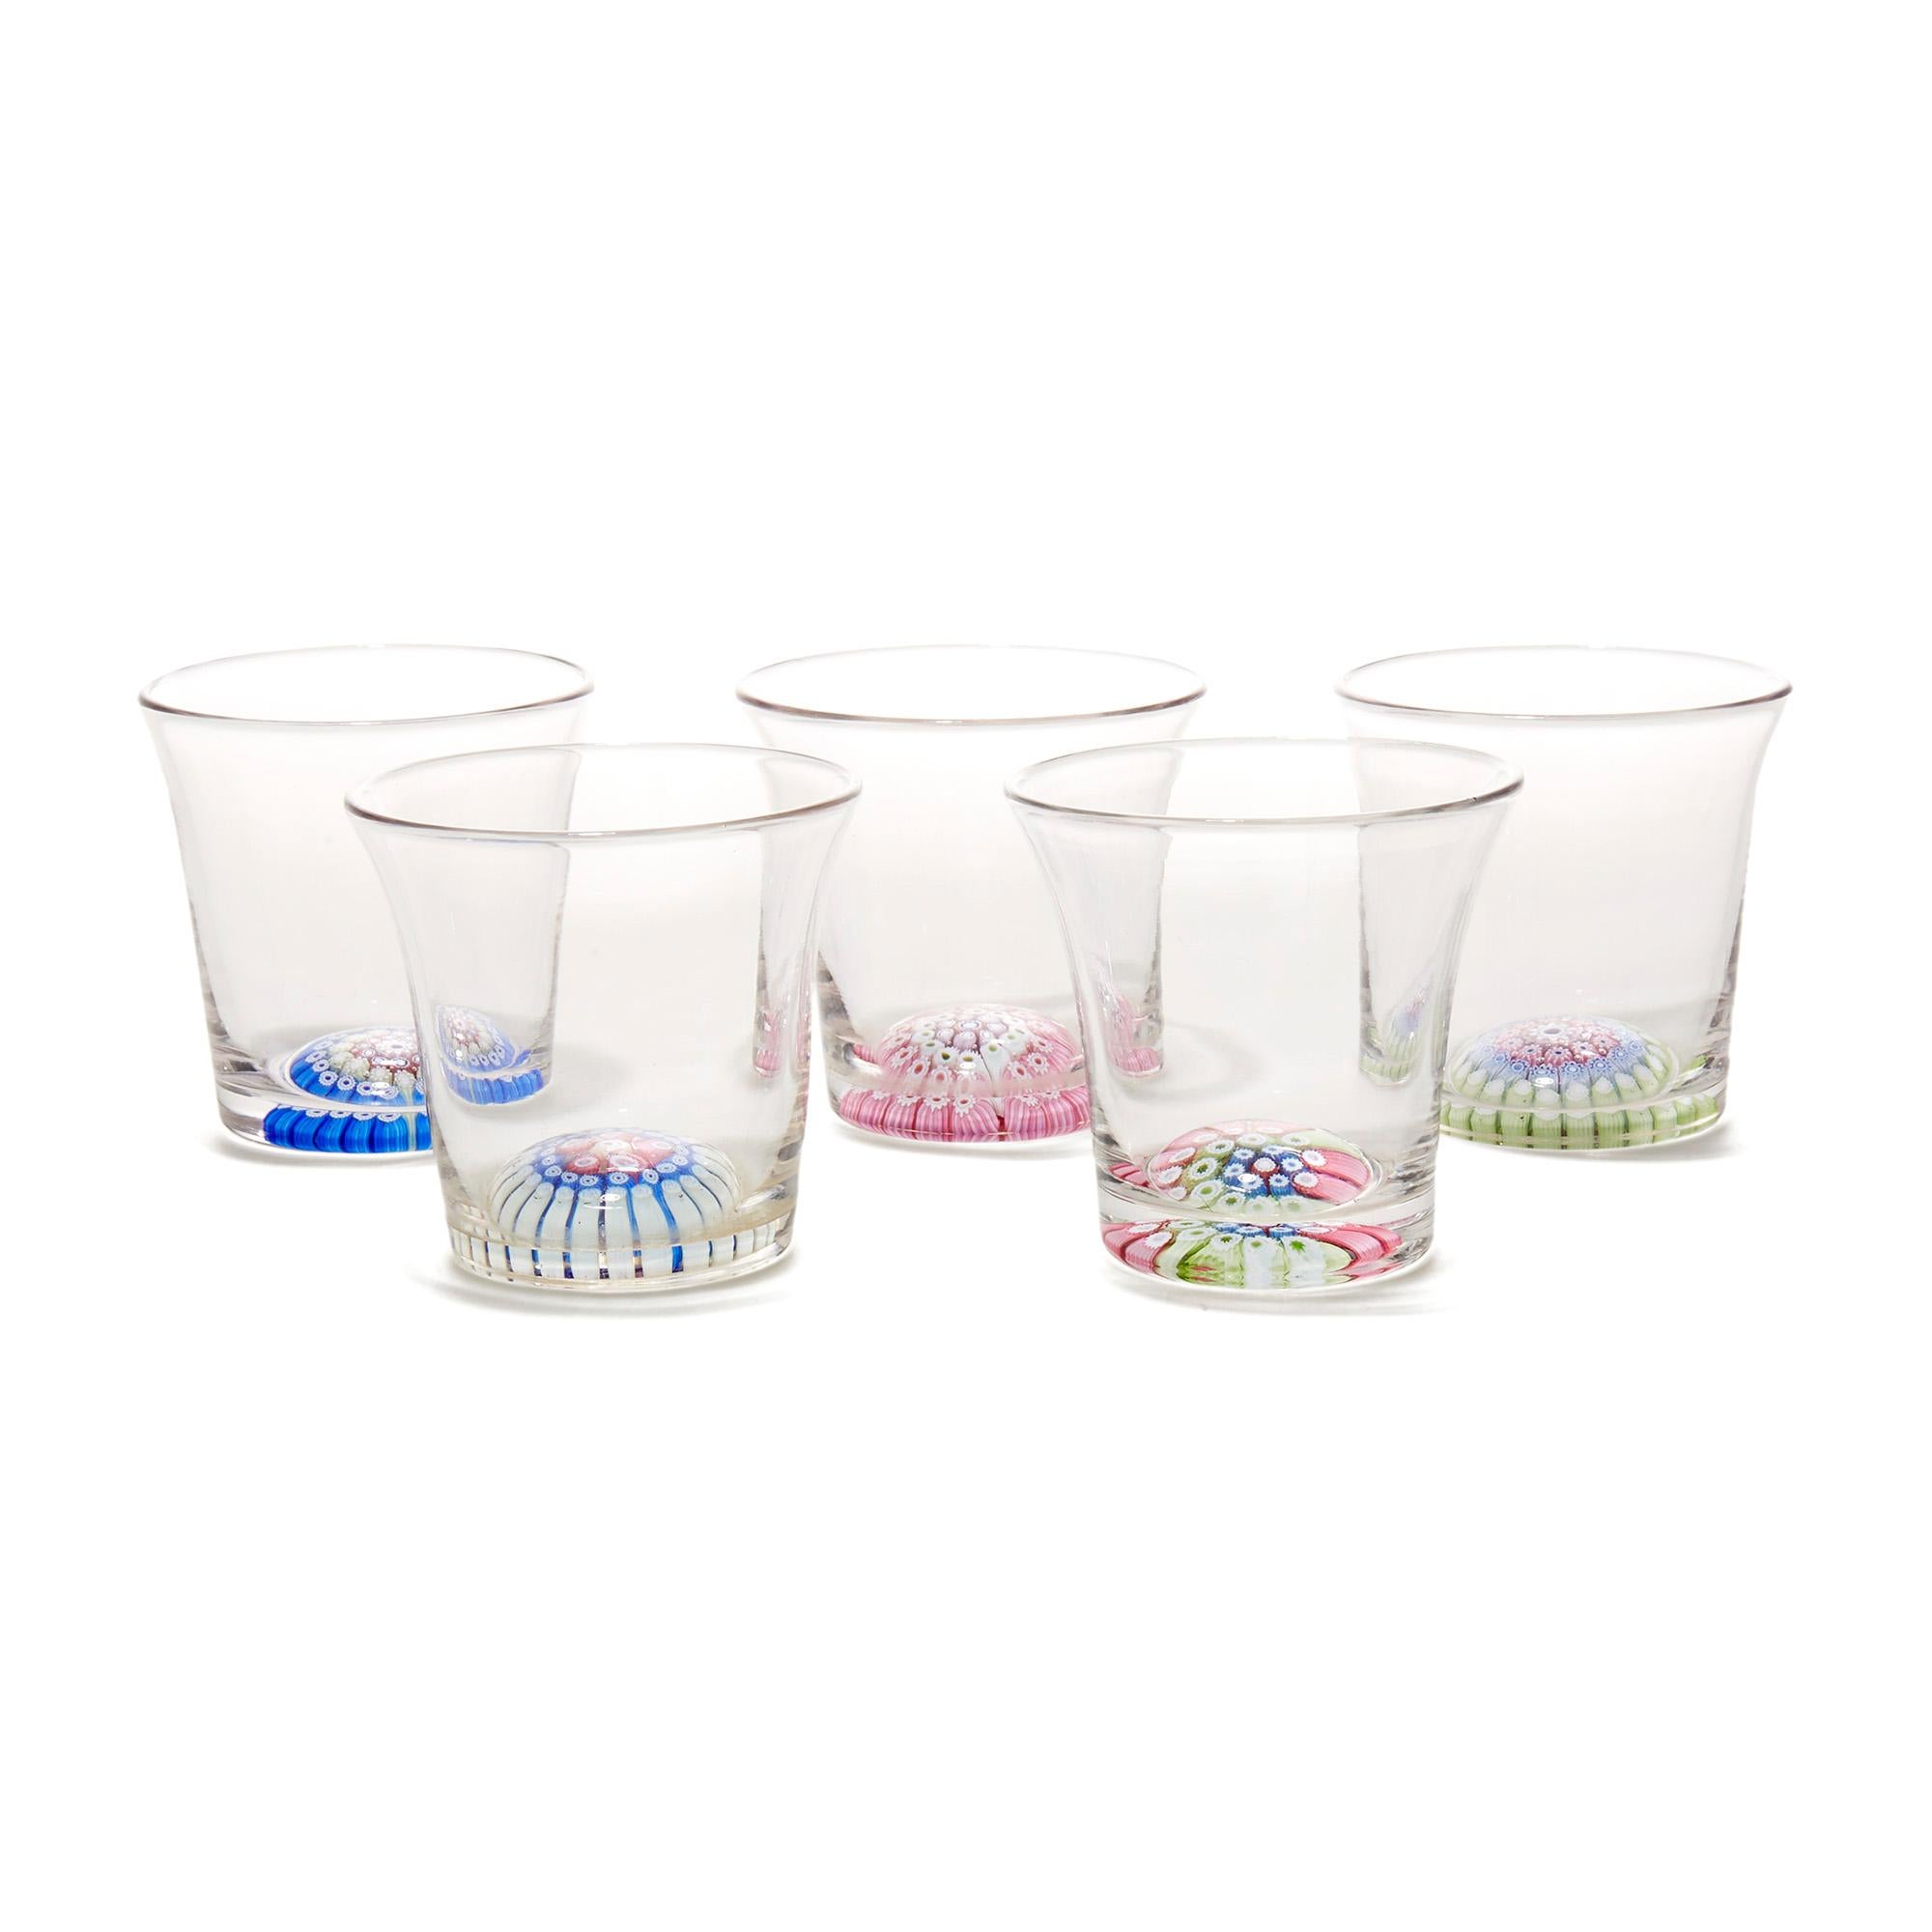 A very fine set of five antique/vintage shot glasses in clear crystal with inset concentric millefiori canes to the base comprising of three rows of colored canes around a central cane. The canes form a slightly domed effect and each glass has a